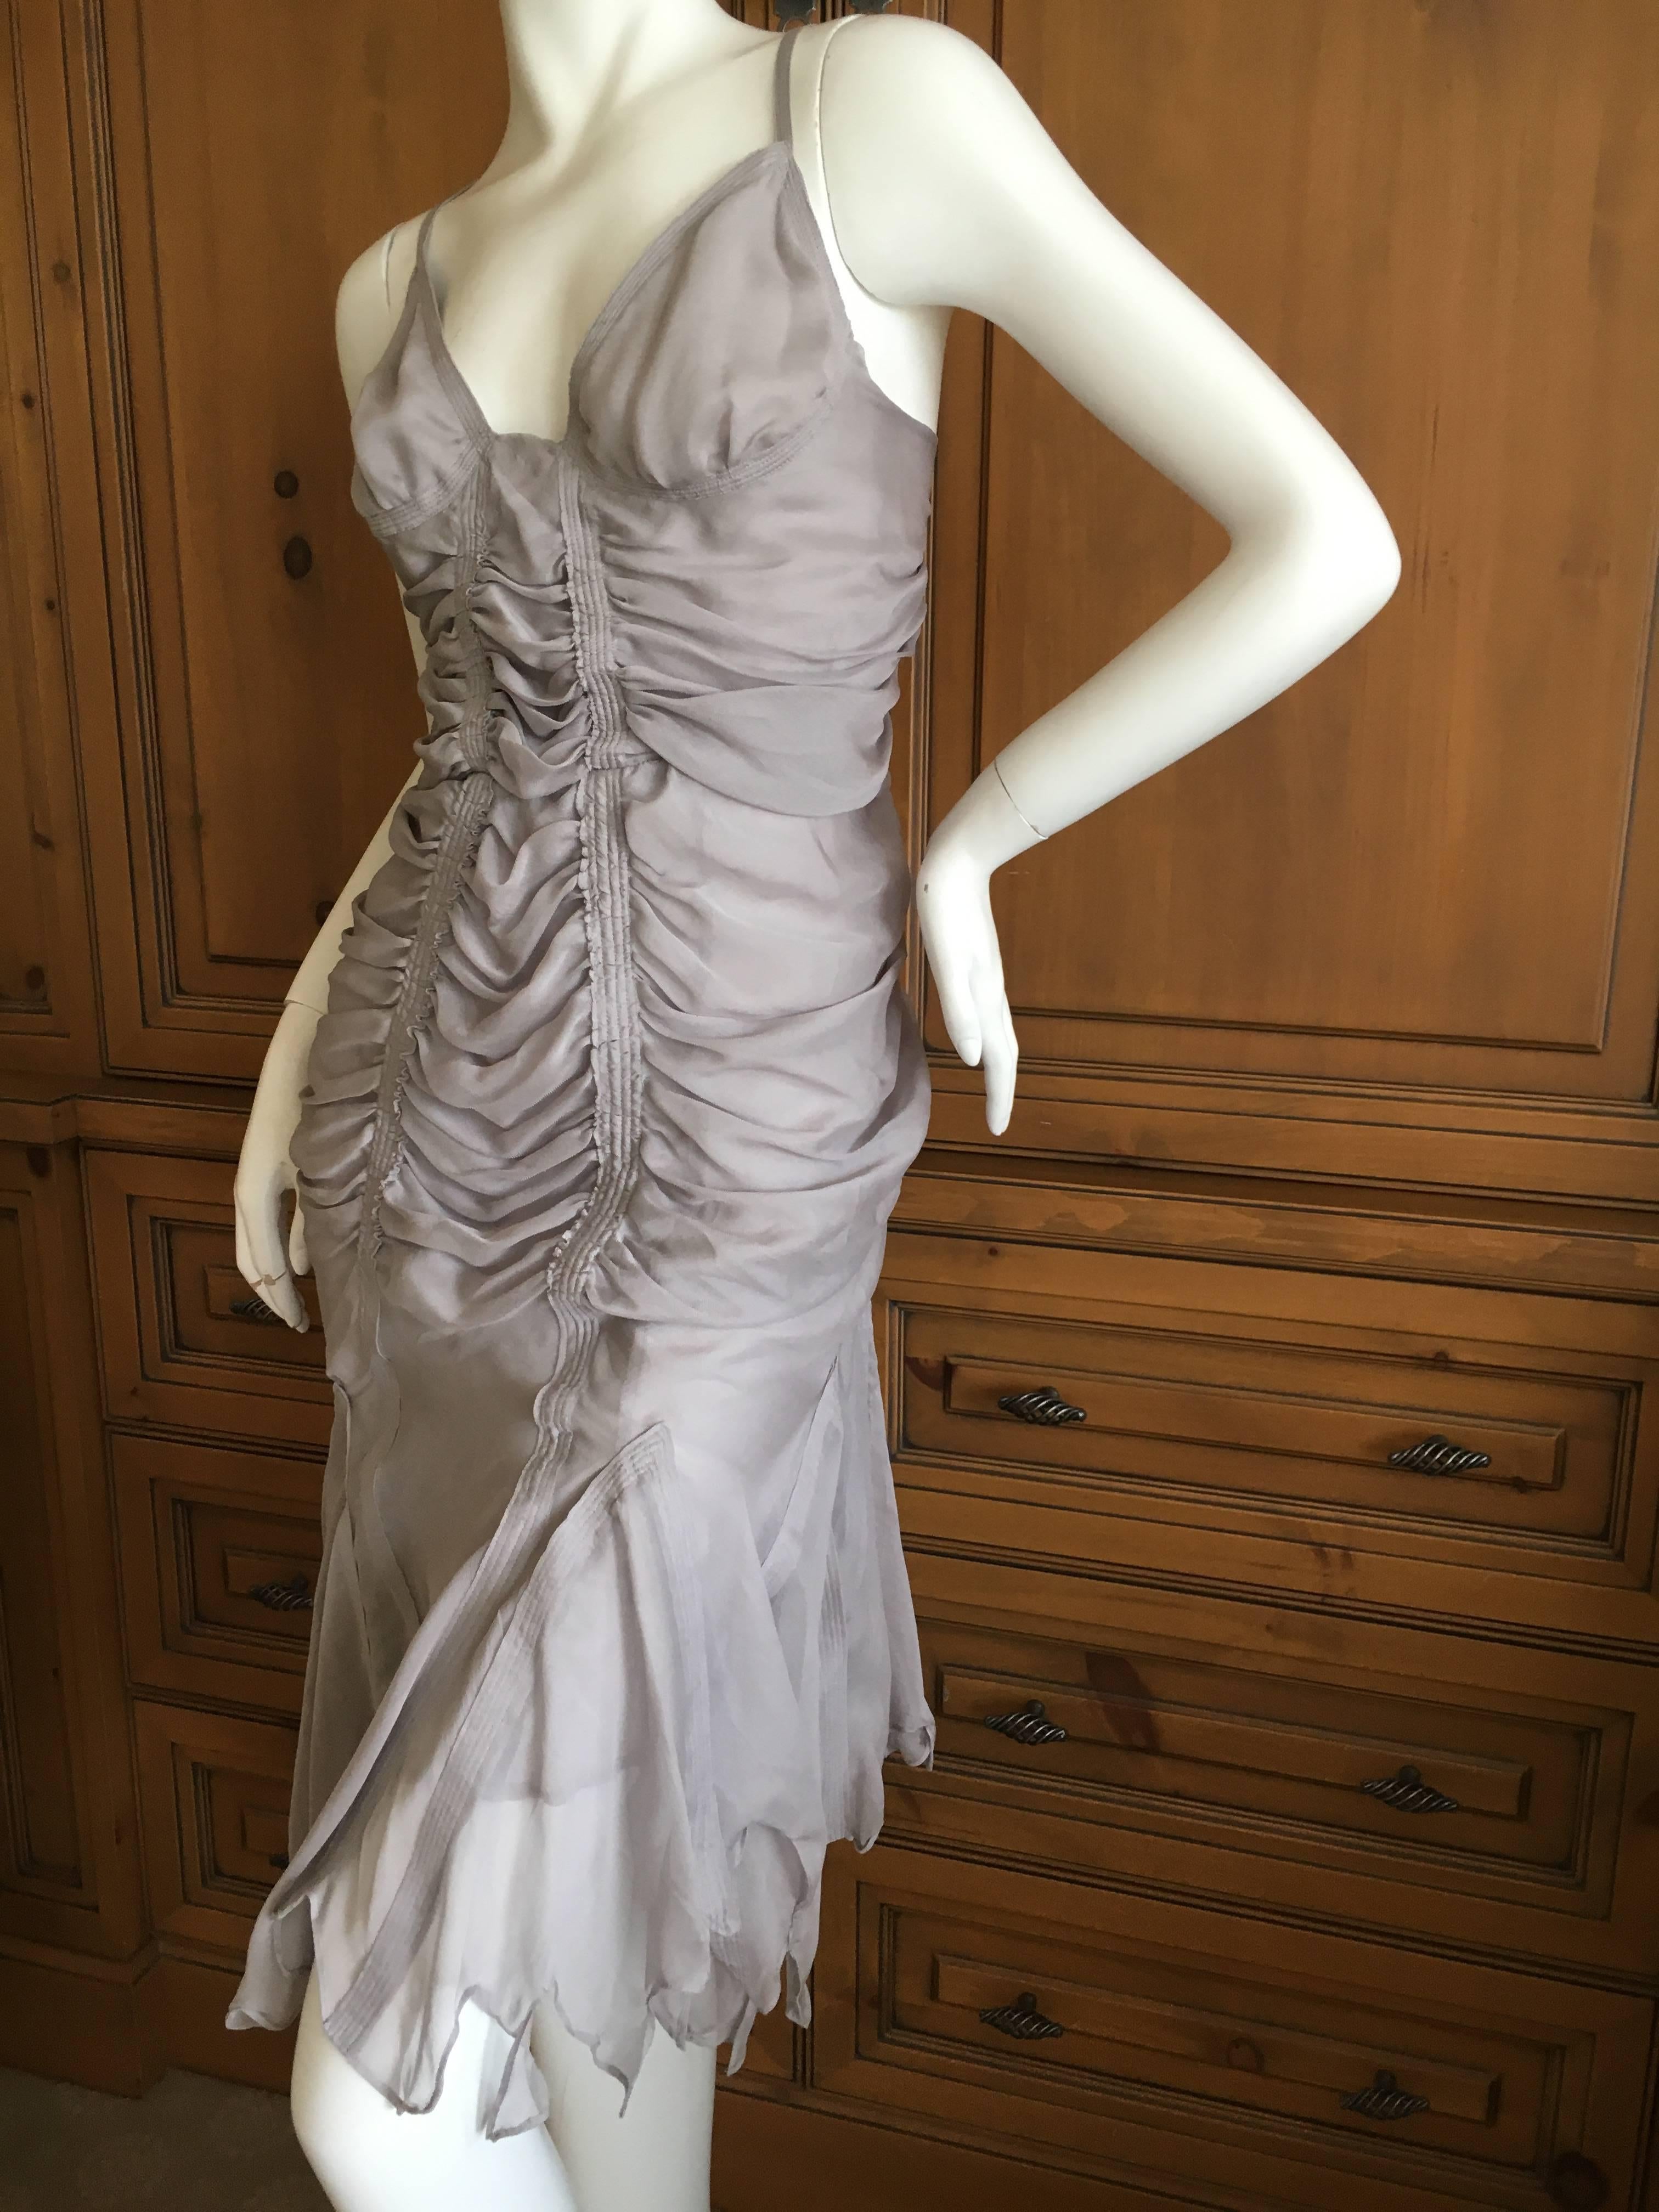 Yves Saint Laurent by Tom Ford Gray Gathered Dress 2003 3